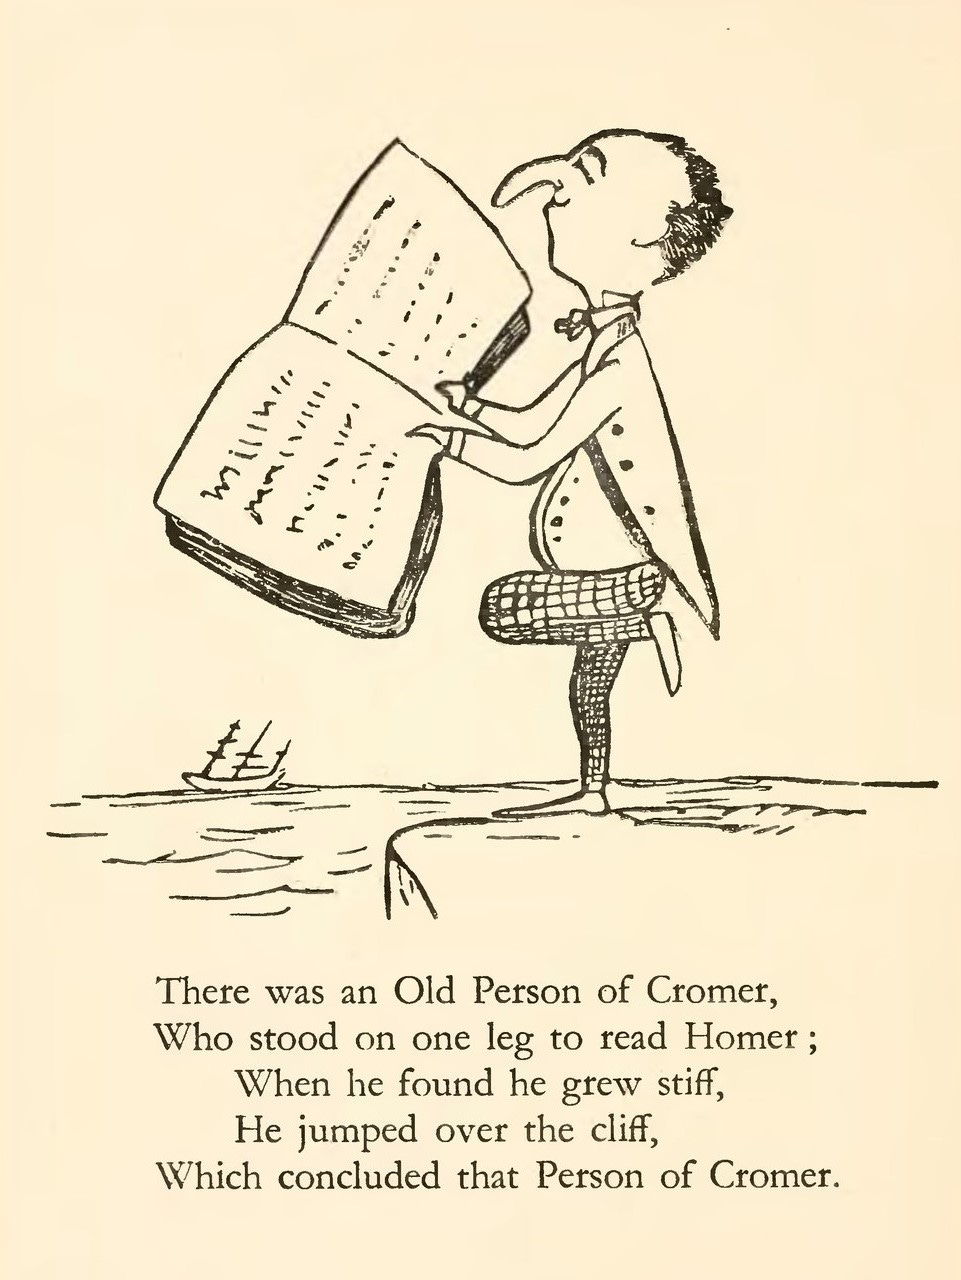 Edward Lear's illustrated limerick There was an old Person of Cromer, Who stood on one leg to read Homer; When he found he grew stiff, he jumped over the cliff, Which concluded that Person of Cromer.